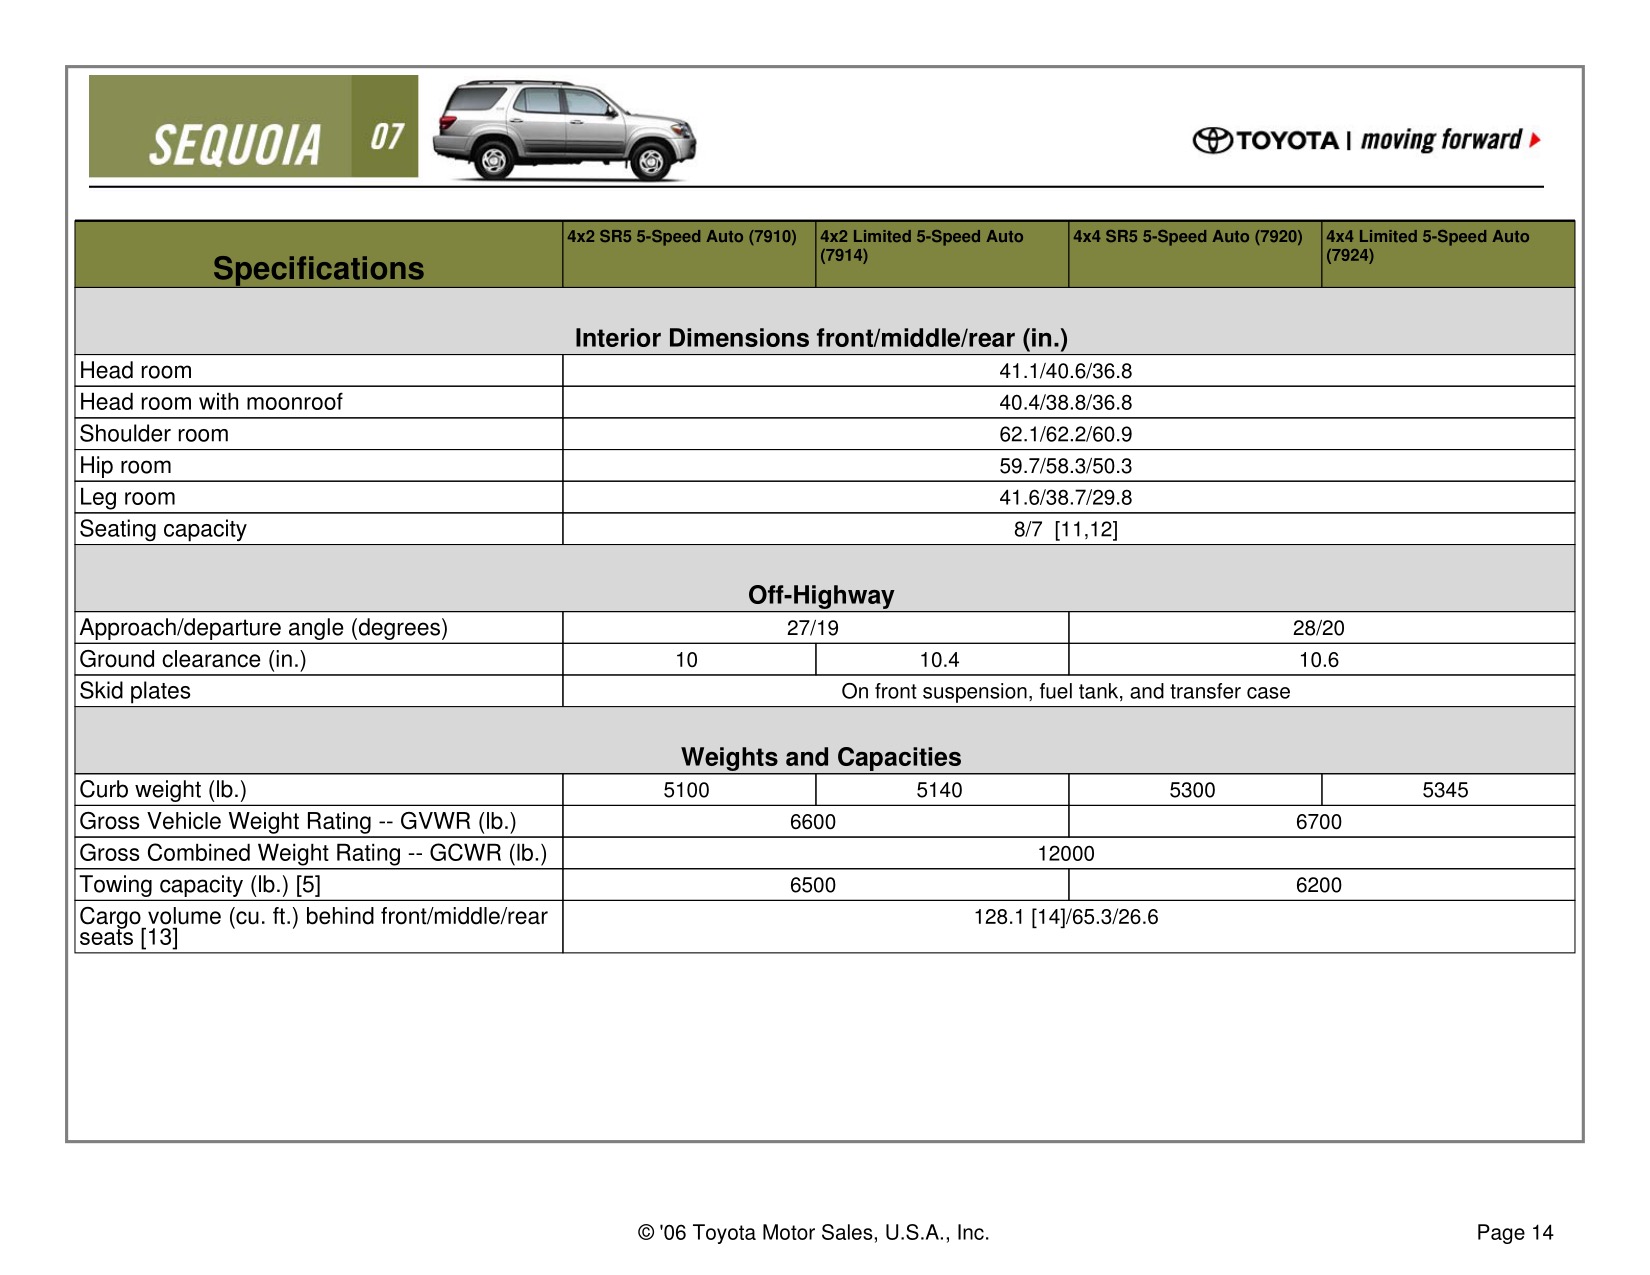 2007 Toyota Sequoia Brochure Page 7